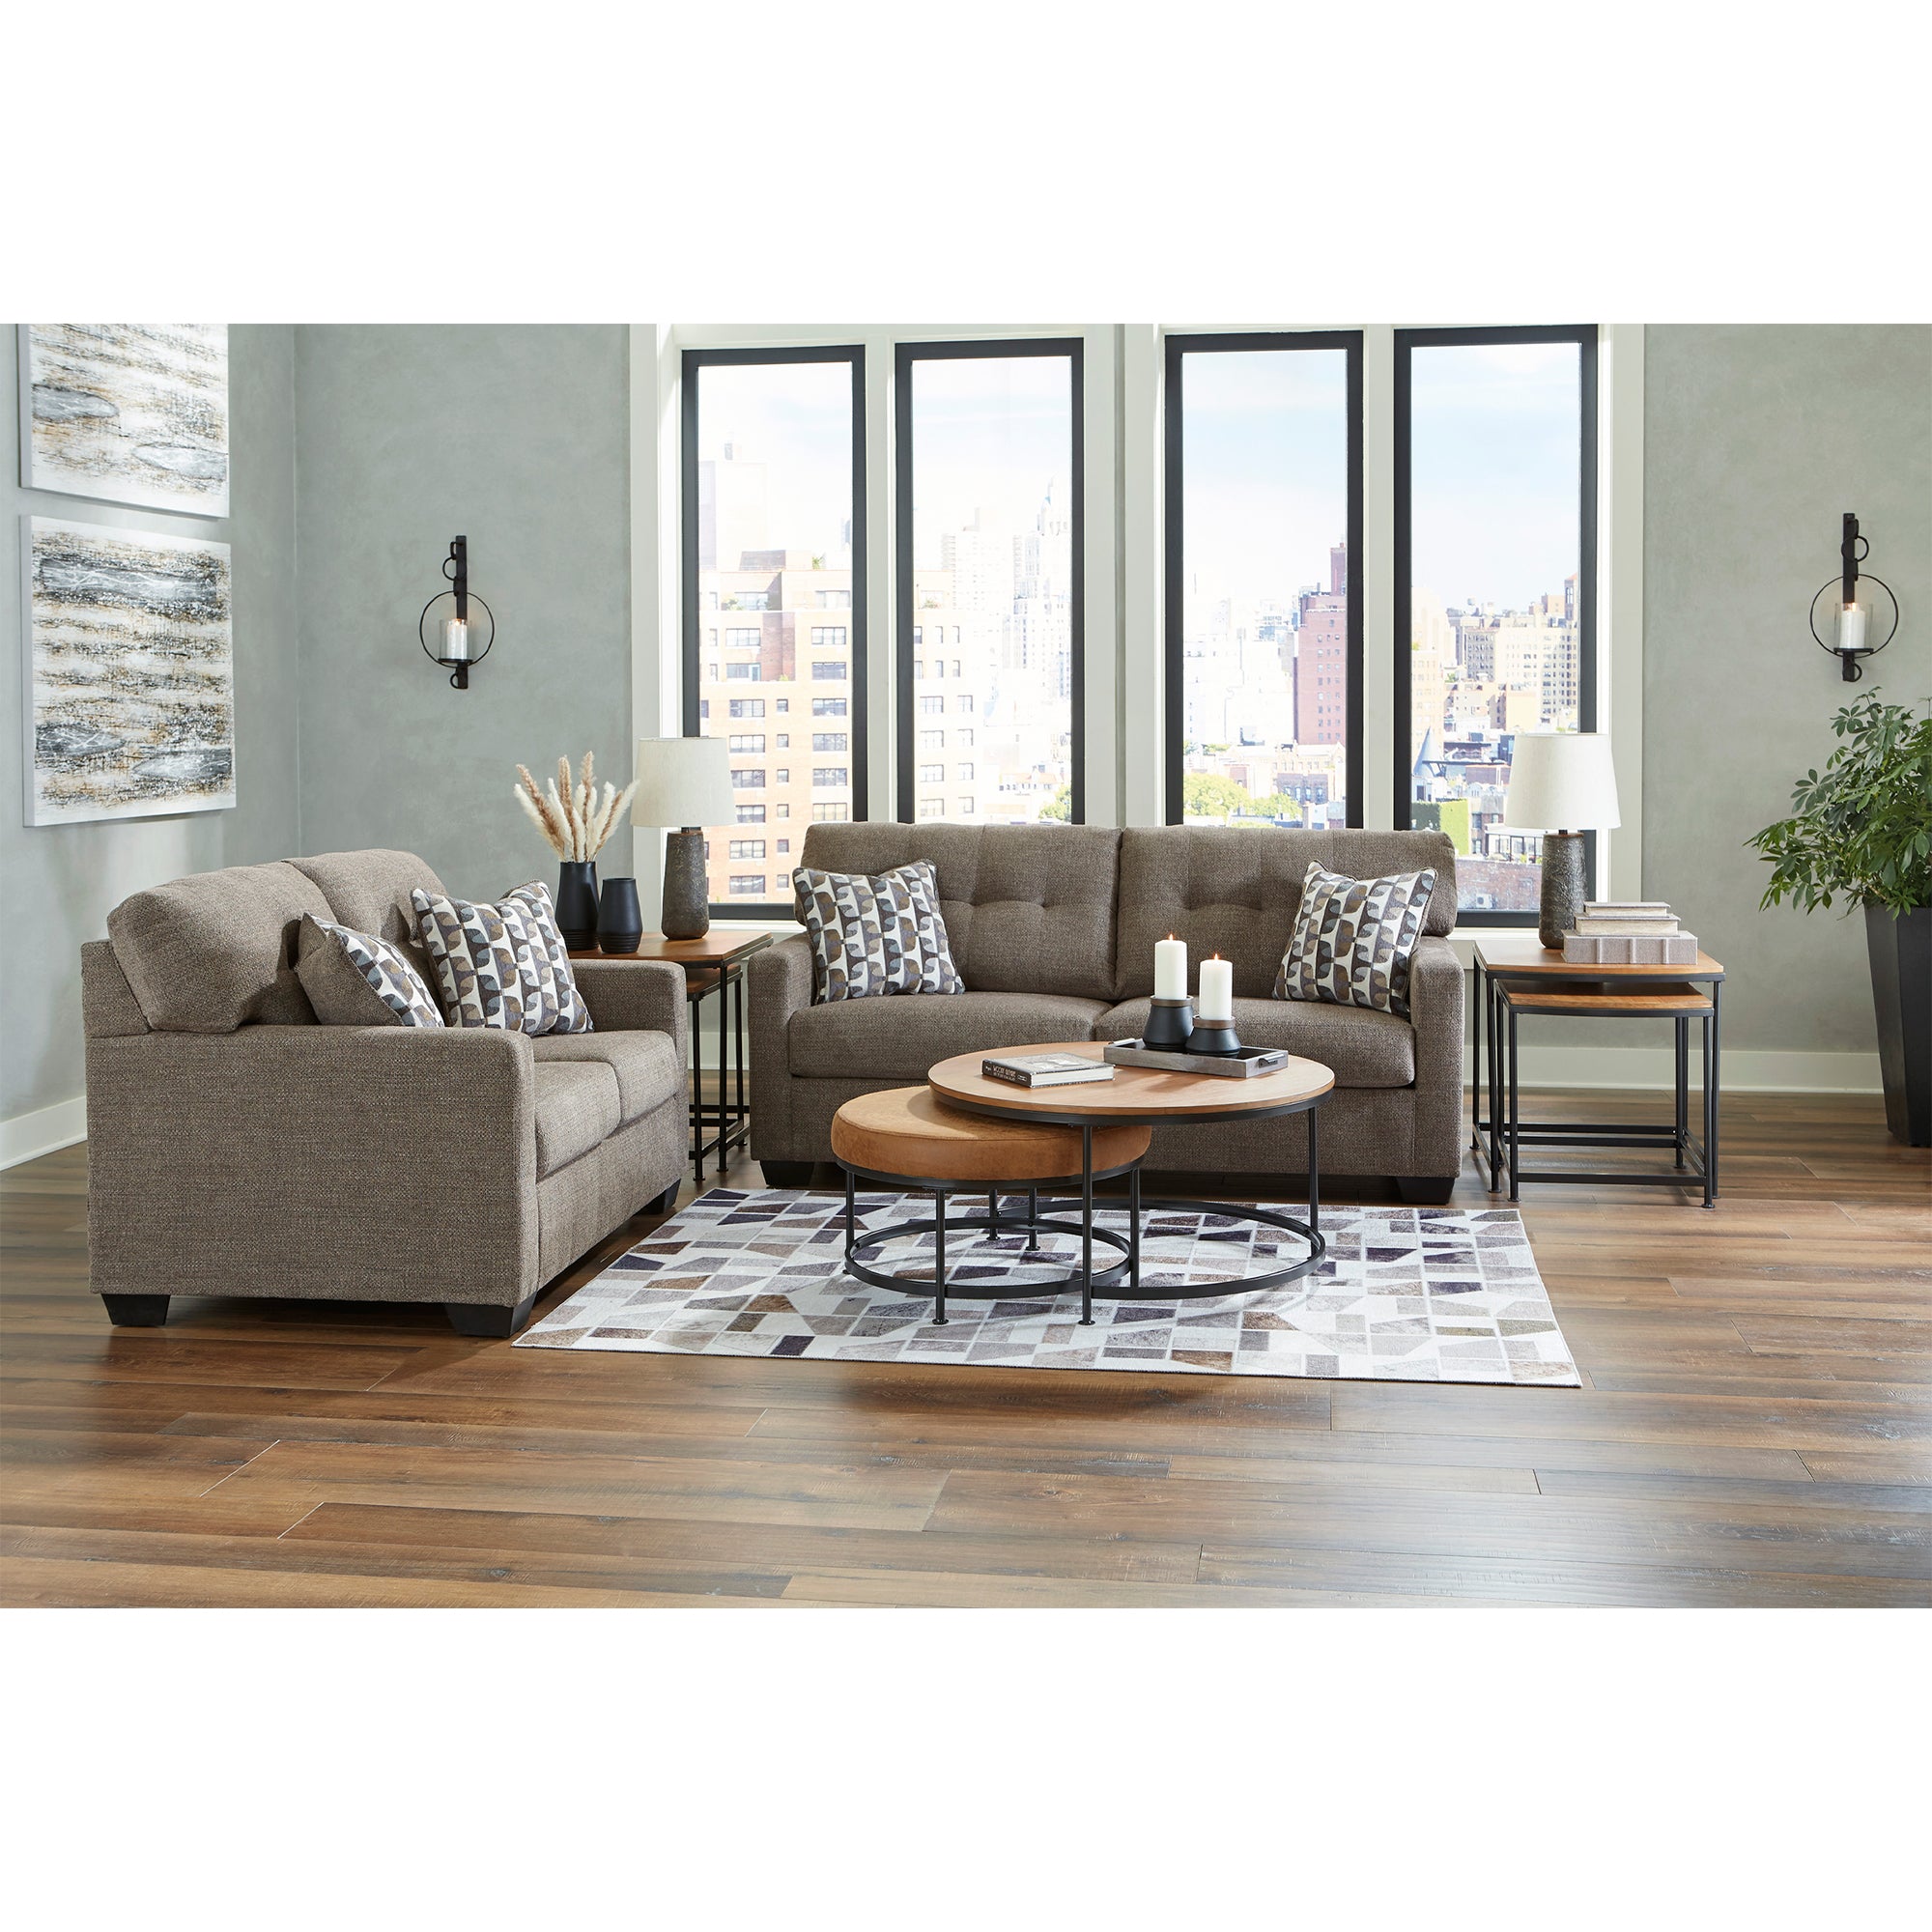 Contemporary Mahoney Sofa in chocolate, designed to offer both style and functionality